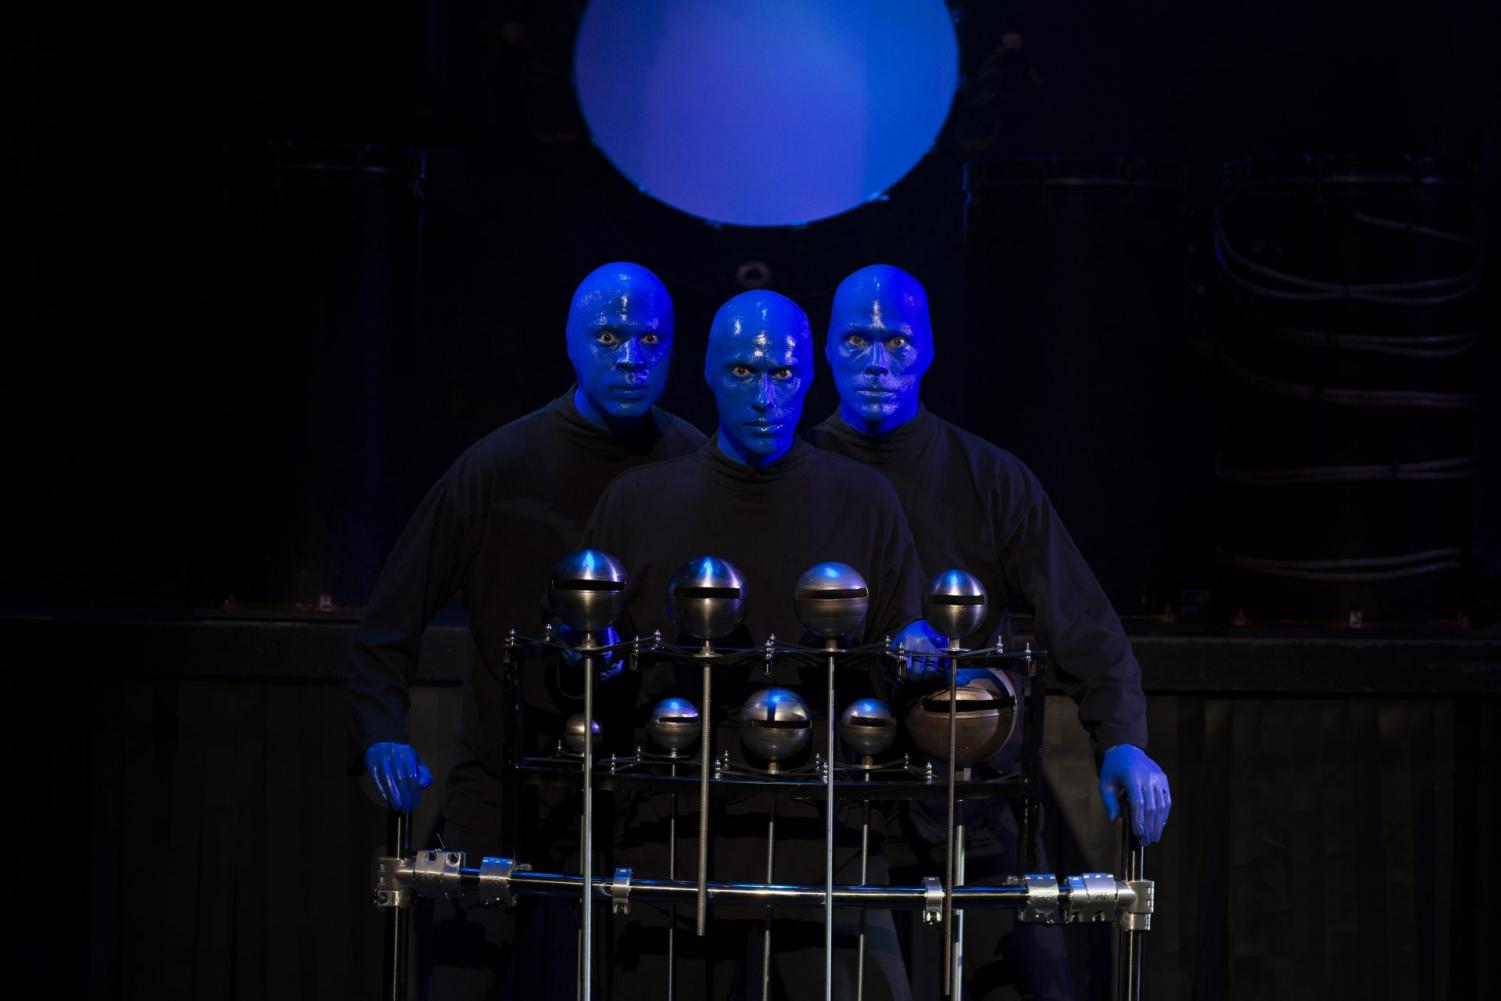 Blue Man Group Chicago tests new instruments, material